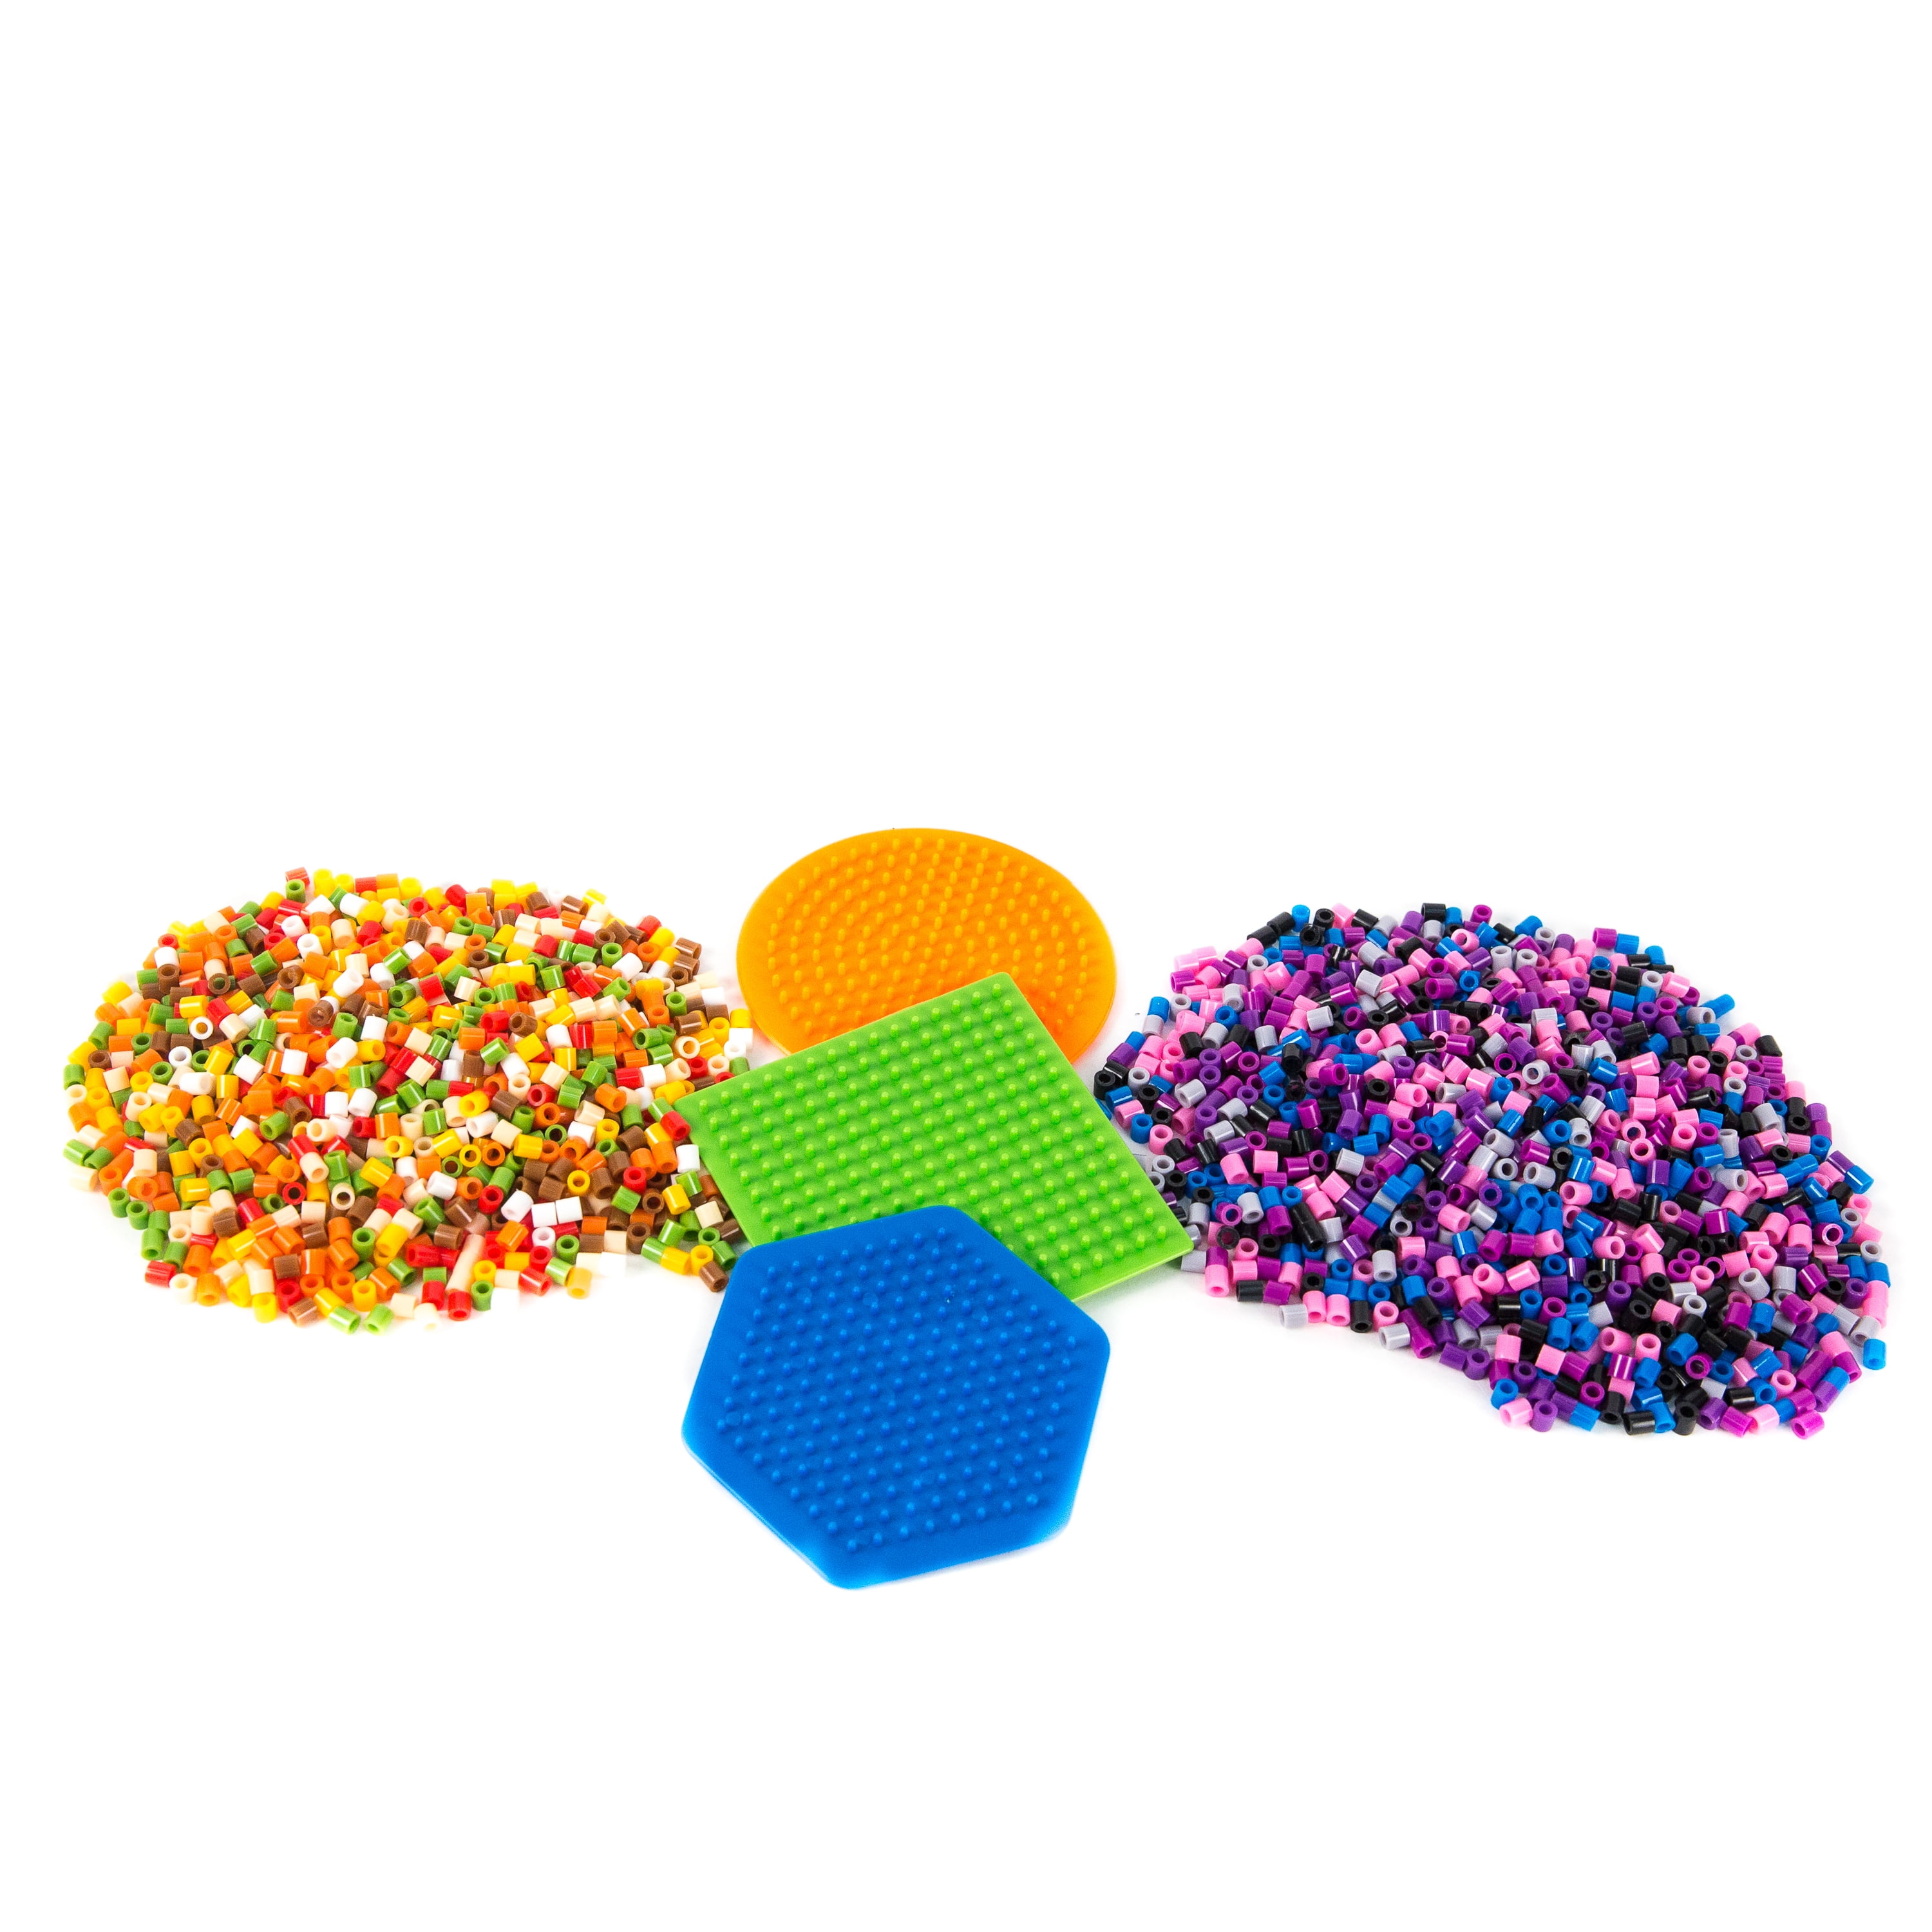 Summer Melty Bead Shapes - Craft Project Ideas